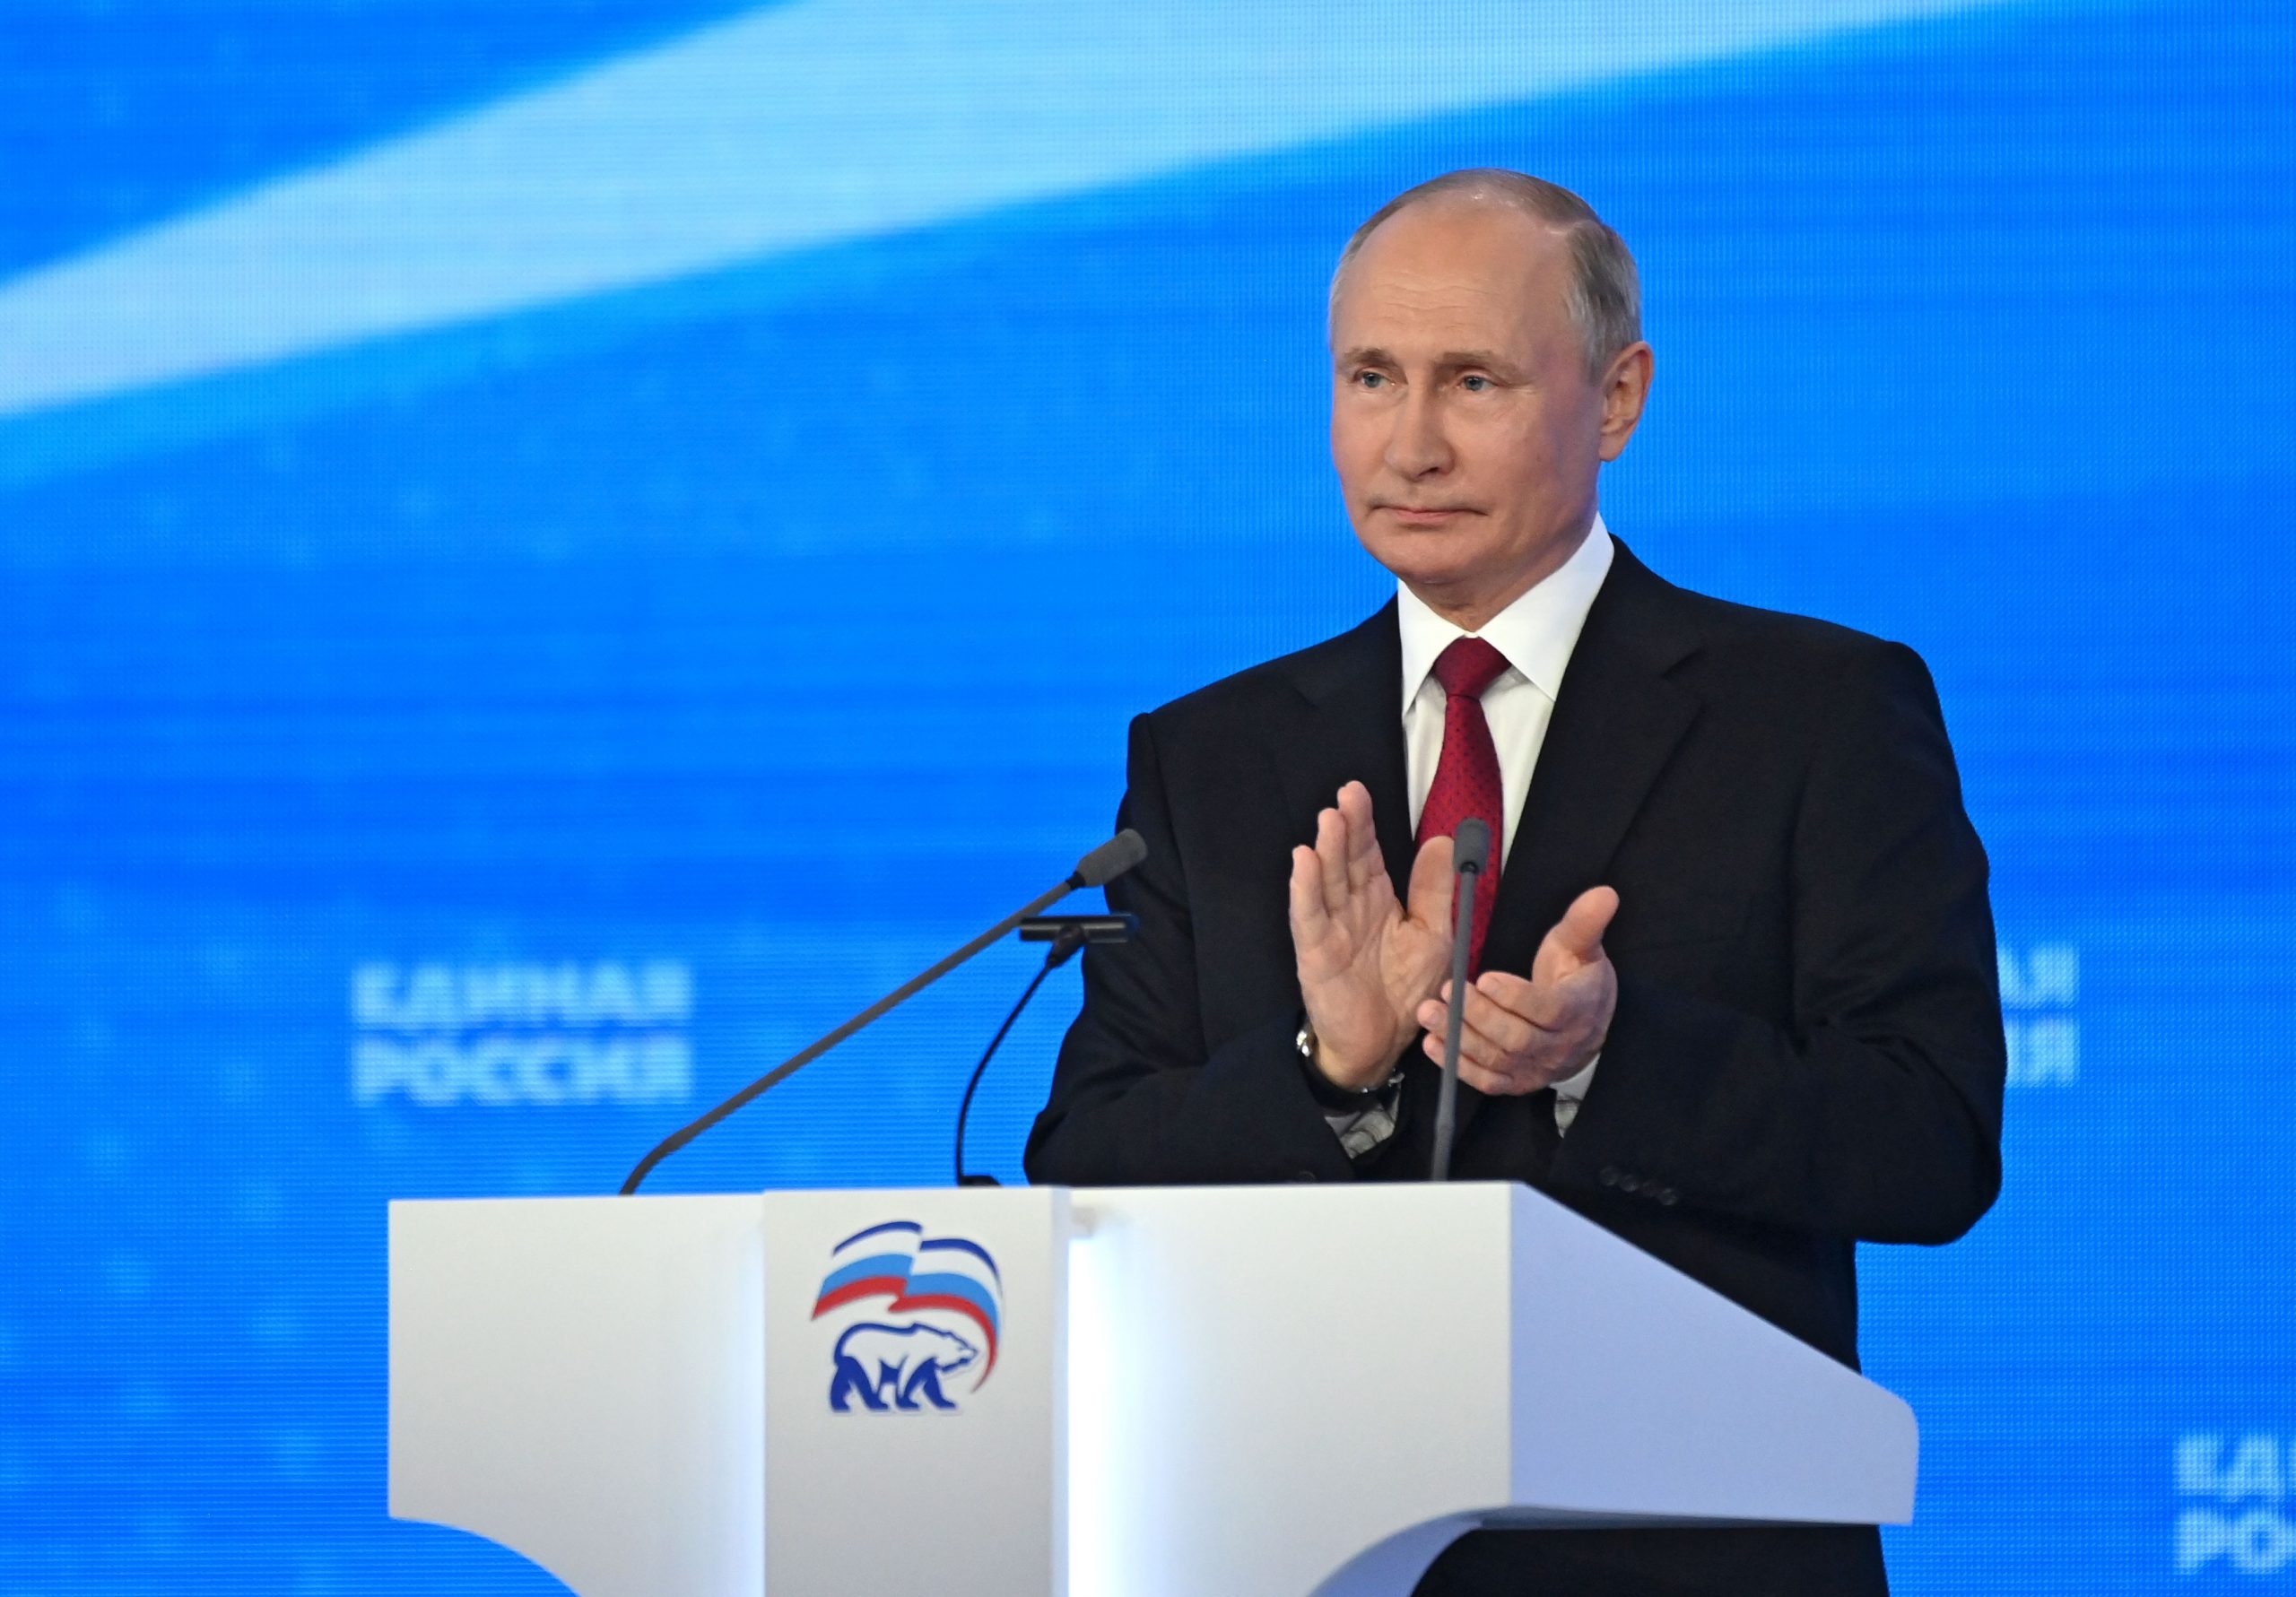 epa09285229 Russian President Vladimir Putin delivers his speech during the United Russia political party annual convention in Moscow, Russia, 19 June 2021. The pro-Kremlin party United Russia is the main ruling political party in the country.  EPA/GRIGORY SYSOYEV / SPUTNIK / KREMLIN POOL MANDATORY CREDIT